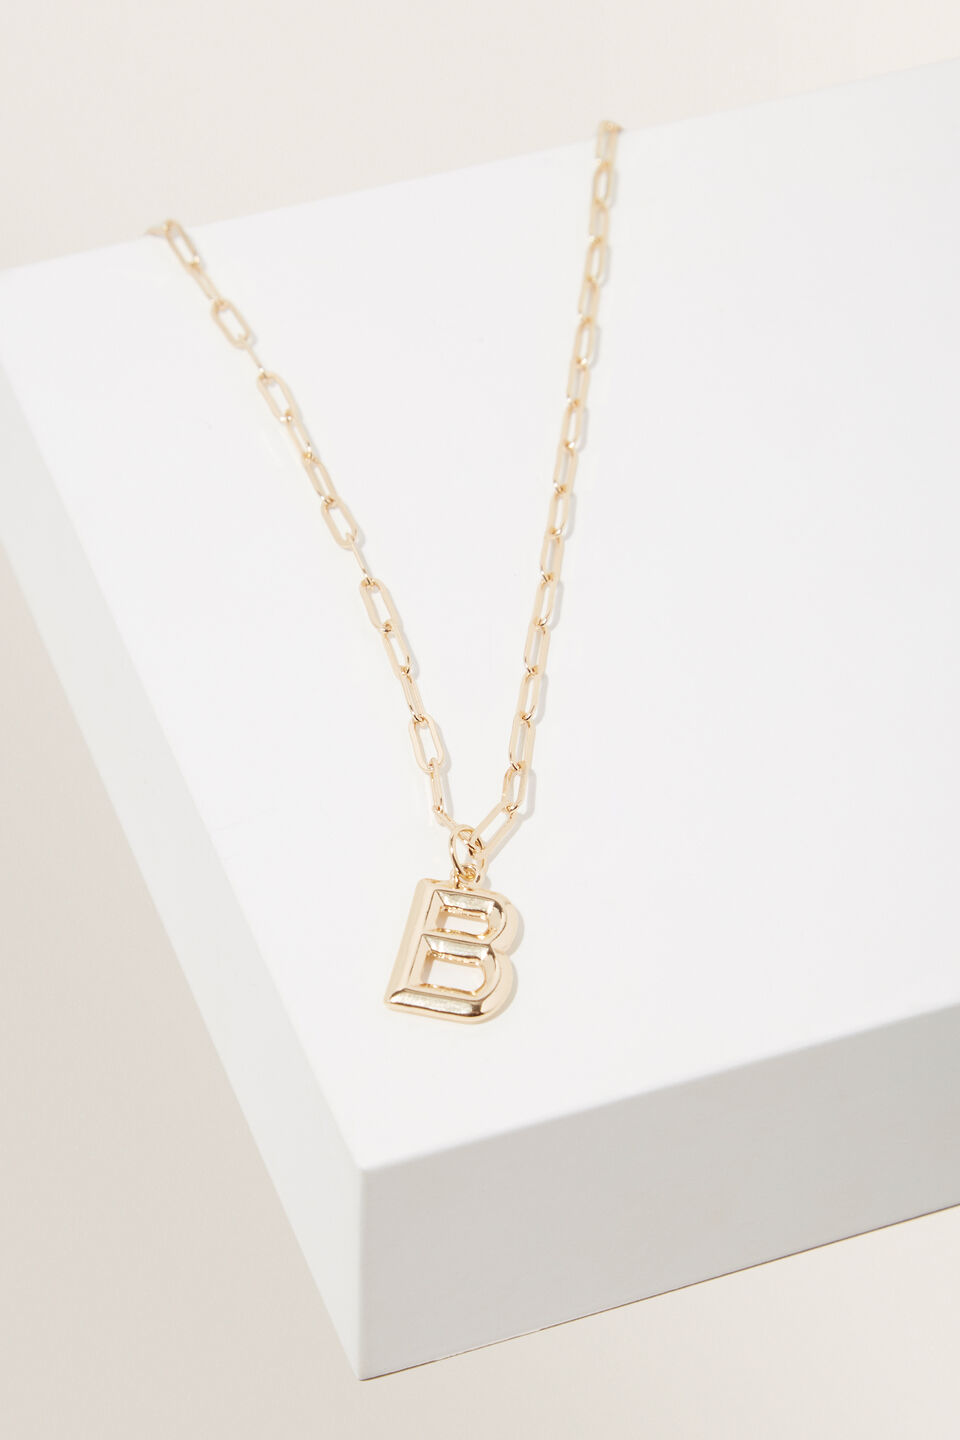 Initial Chain Necklace  B